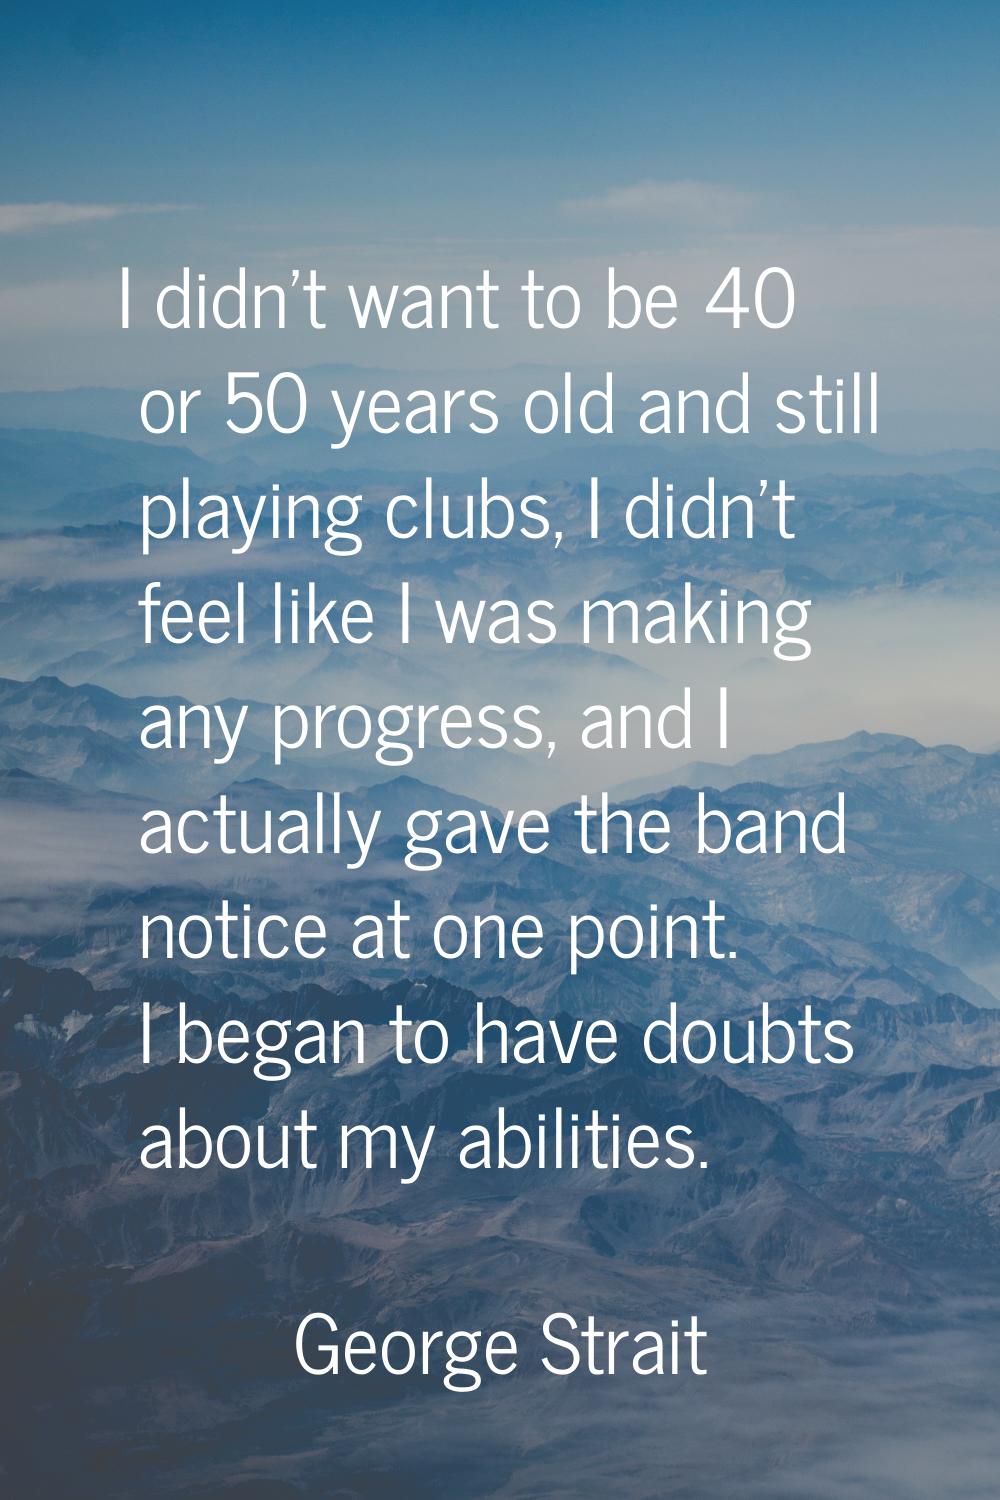 I didn't want to be 40 or 50 years old and still playing clubs, I didn't feel like I was making any